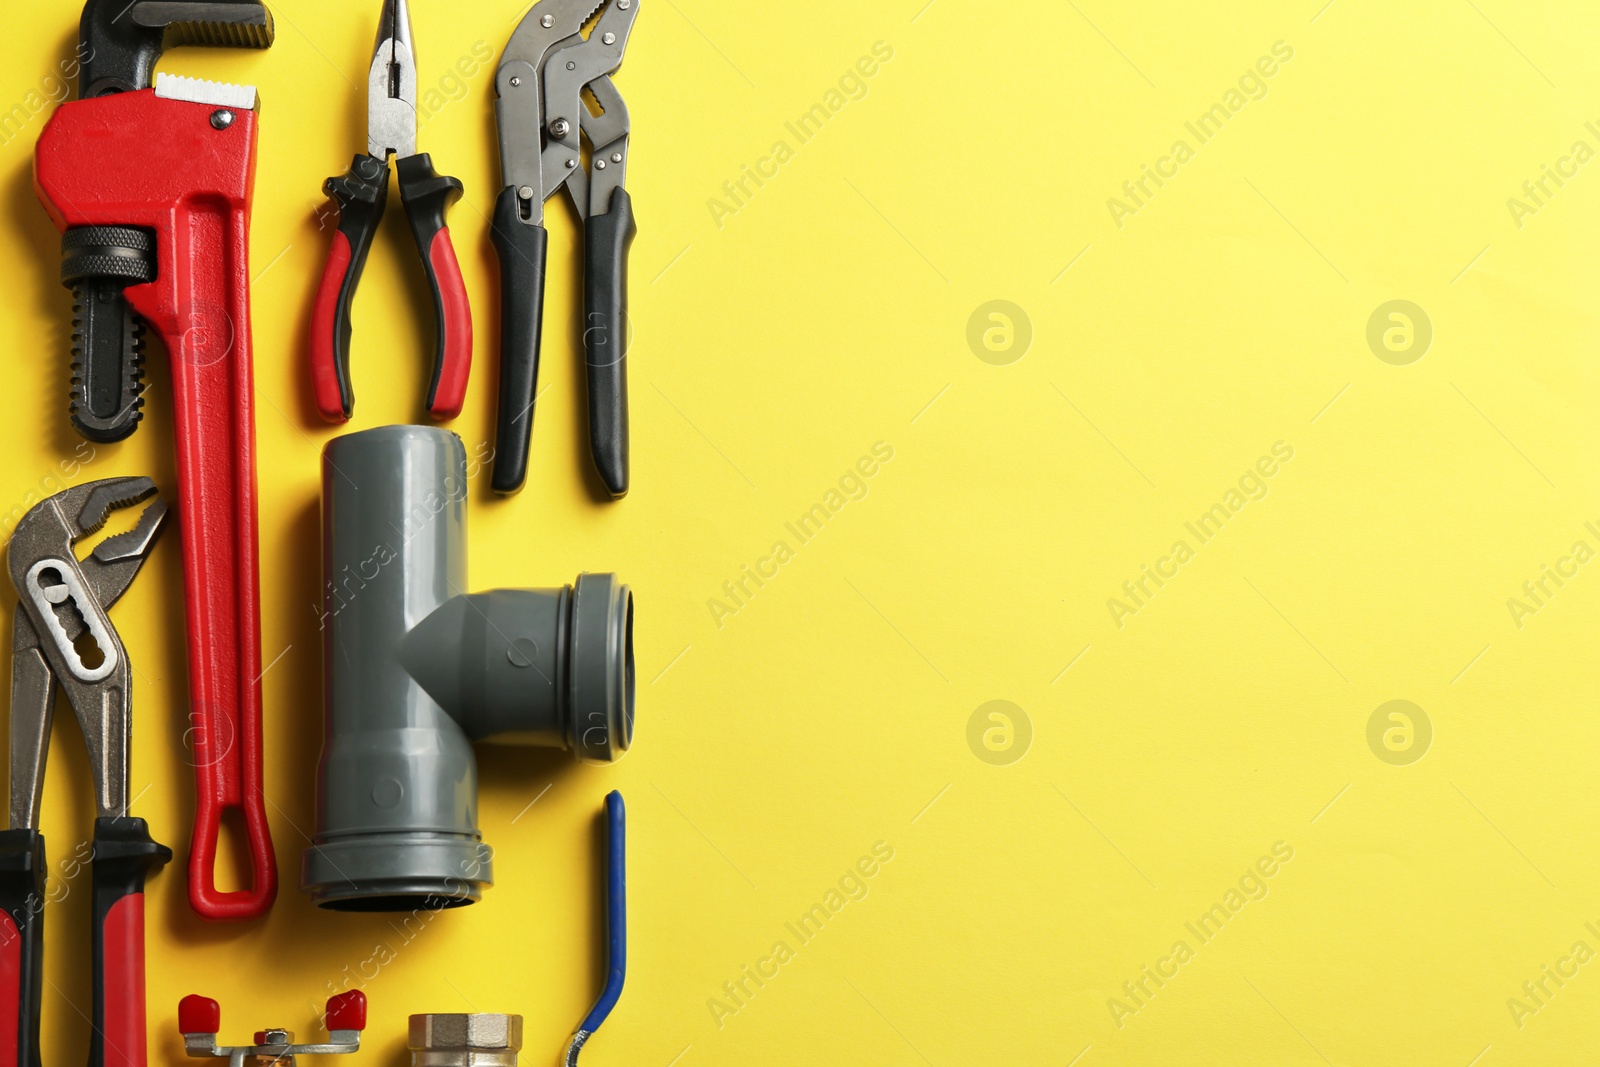 Photo of Flat lay composition with plumber's tools and space for text on color background